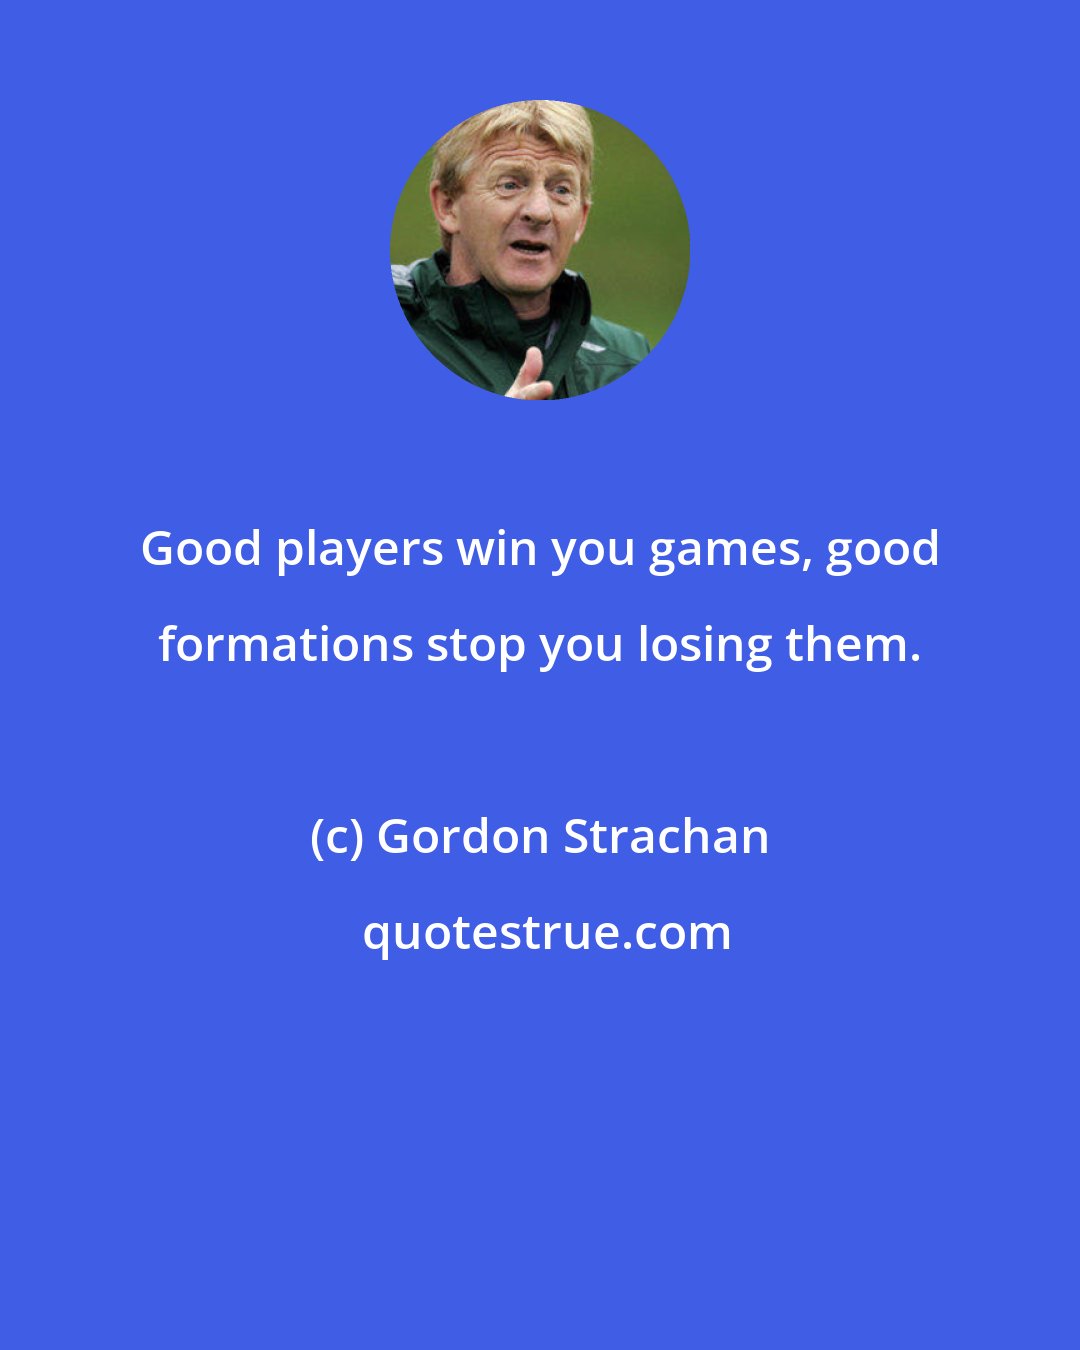 Gordon Strachan: Good players win you games, good formations stop you losing them.